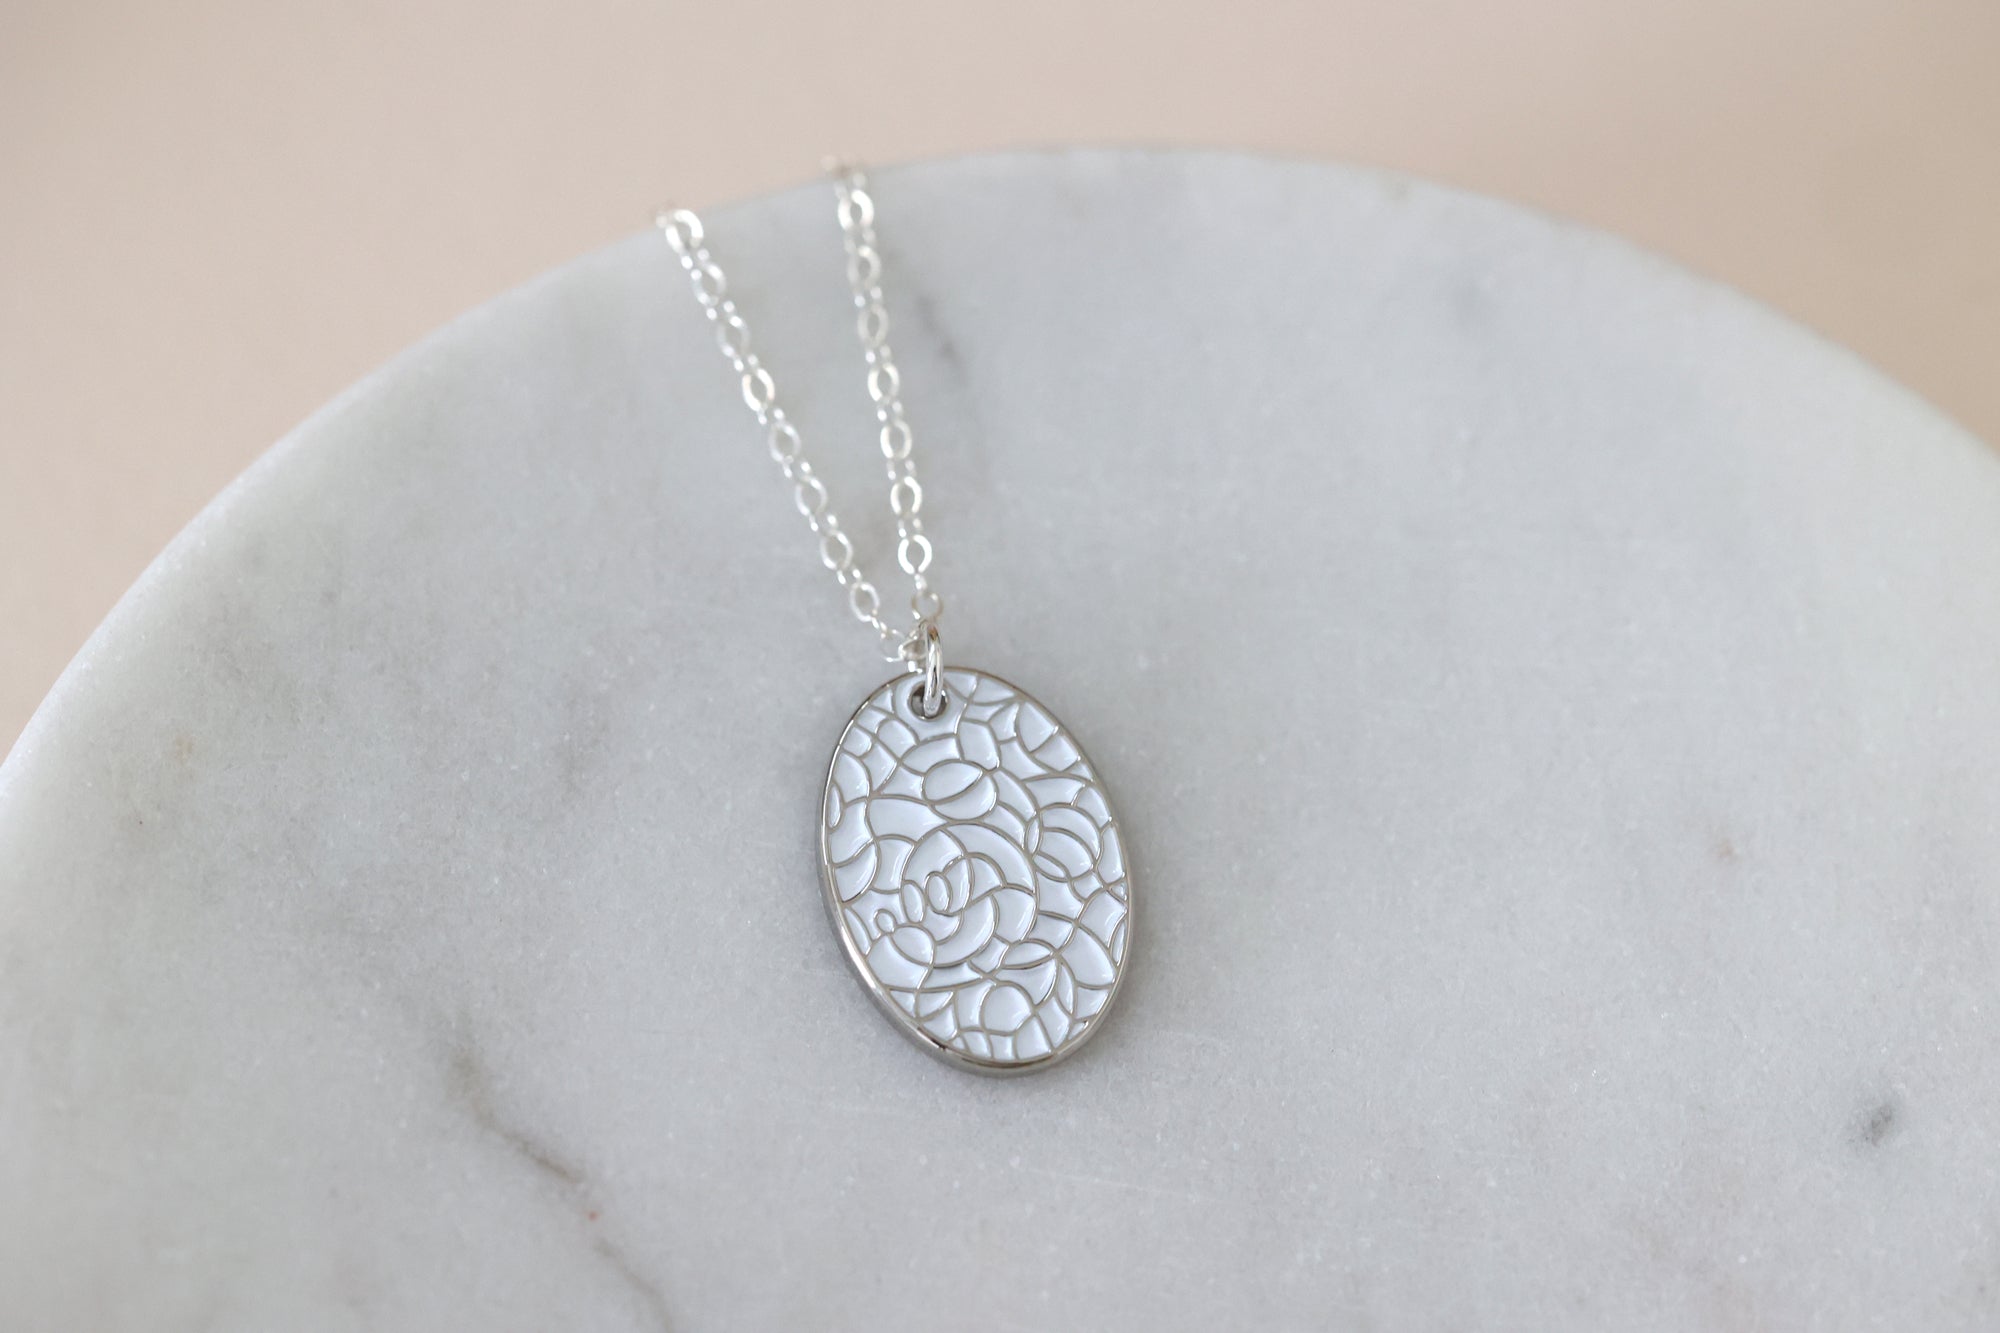 Solid Silver Necklace with a 2 Initial Monogram & Hidden Message